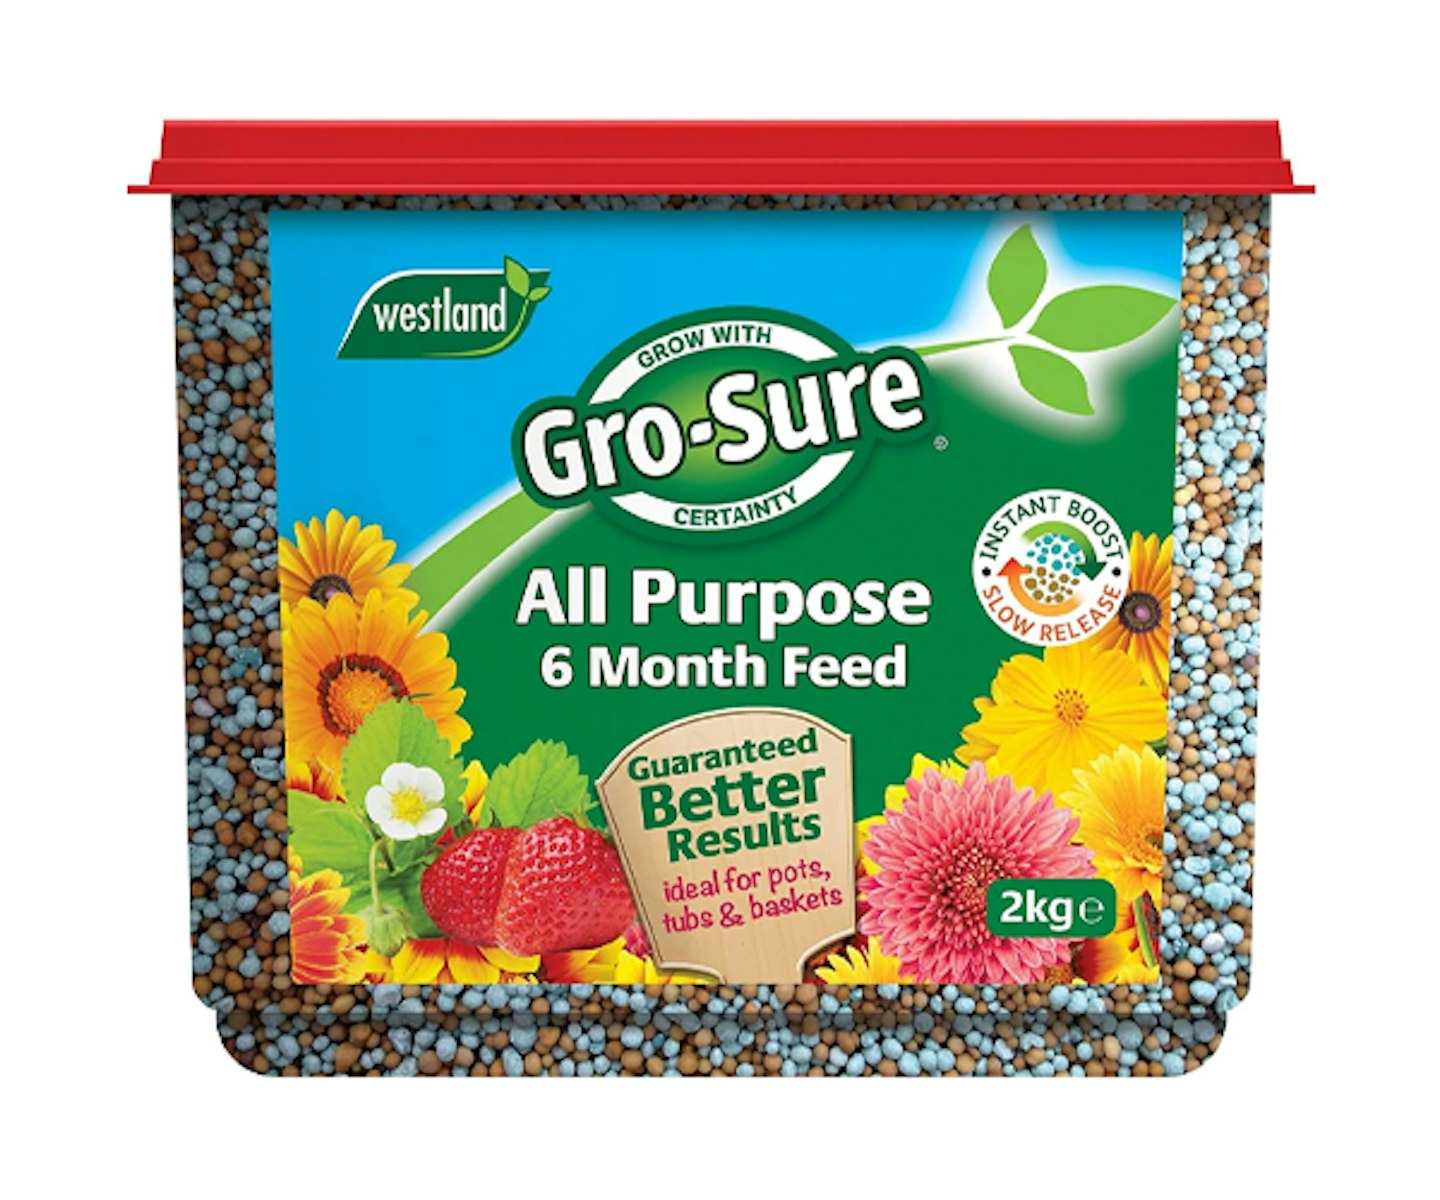 Gro-Sure 6 Month Slow Release Plant Food